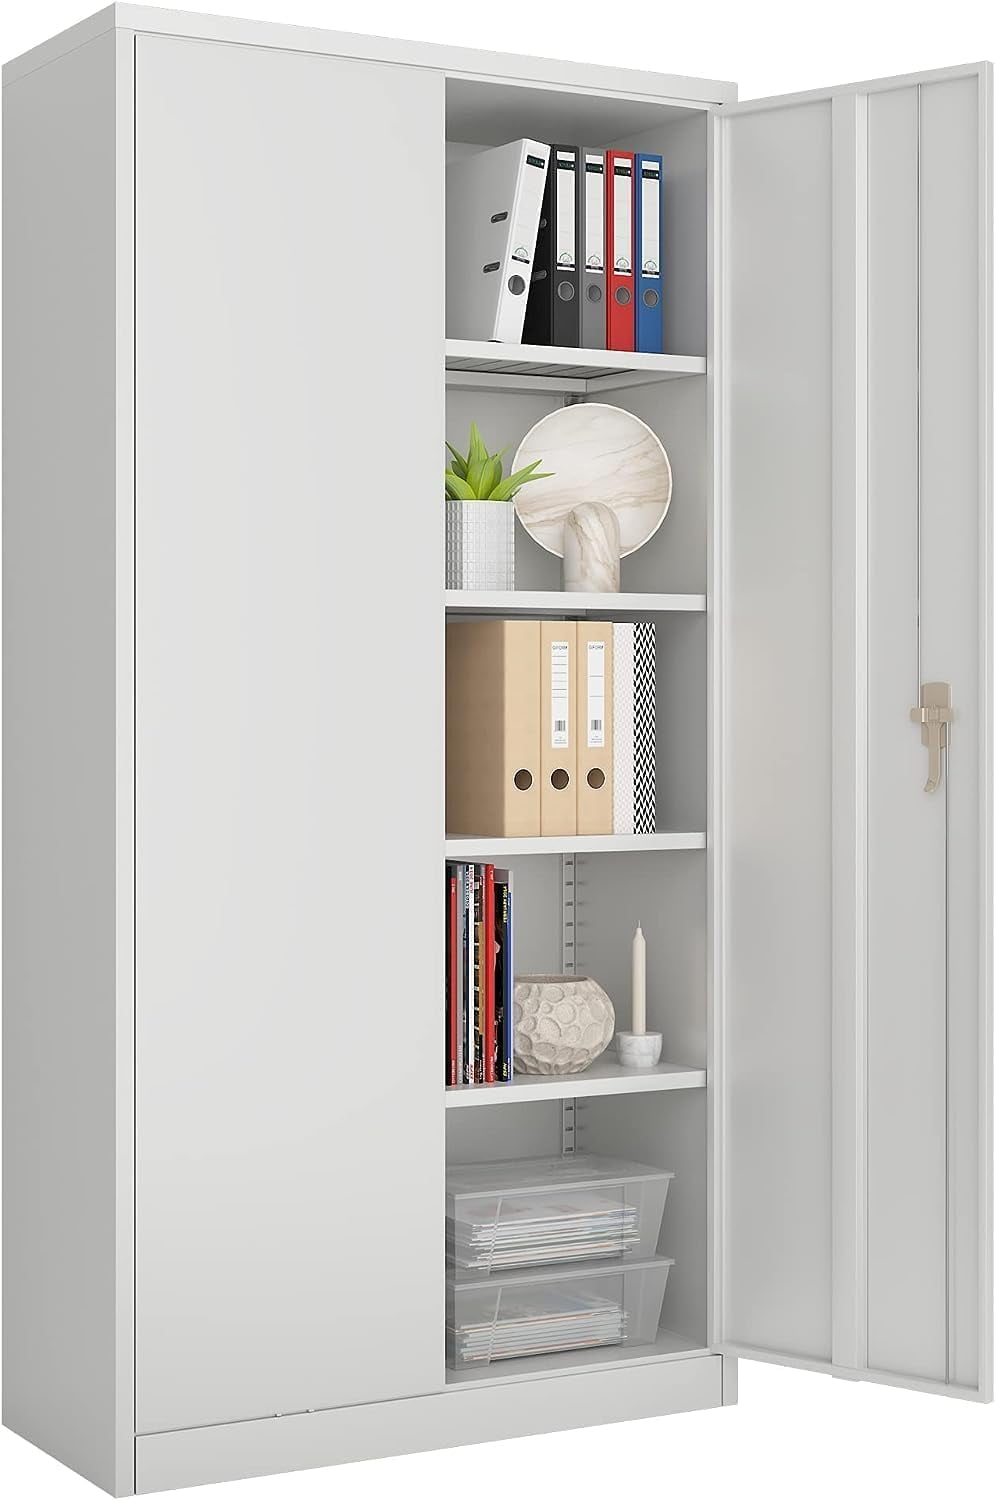 AFAIF Metal Storage Cabinet with Lock,71 White Garage Cabinet with 2 Doors  and 5 Adjustable Shelves, Steel Locking Cabinets Tall Tool Storage